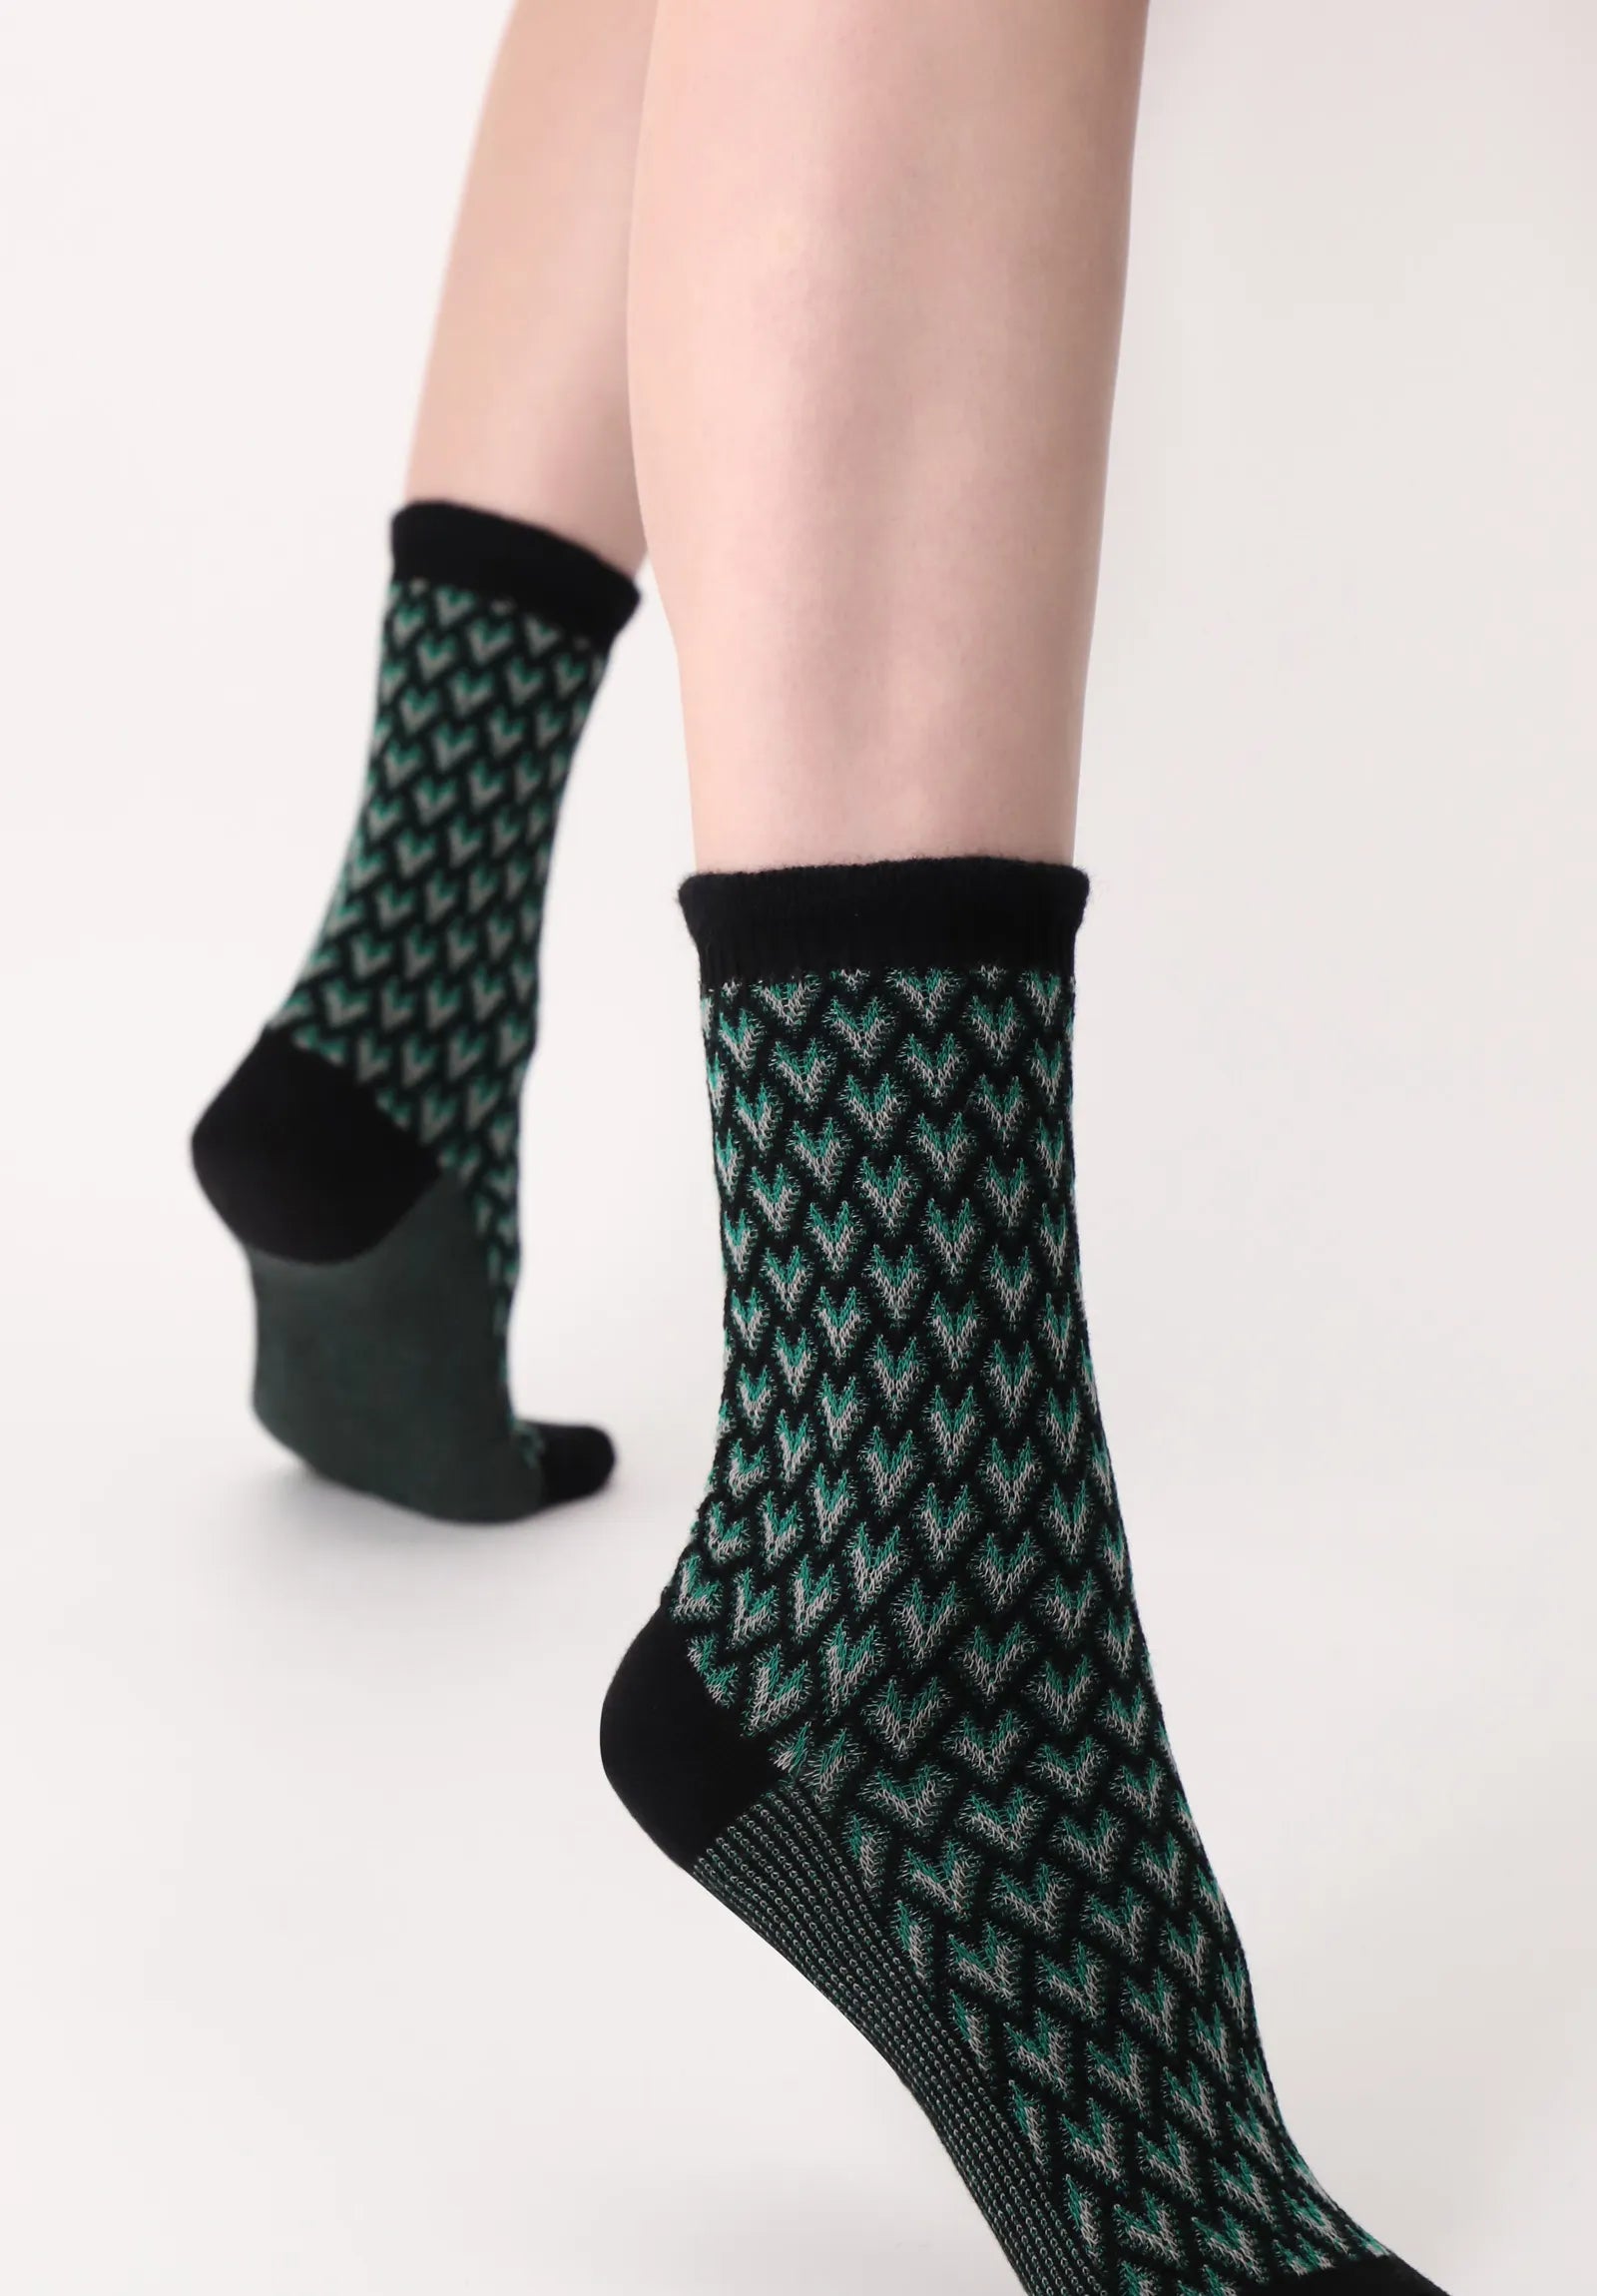 Oroblù Jacquard Deco Calzino - Black cotton mix fashion knitted ankle socks with a three tone jacquard pattern in shades of green and slight ruffled cuff.